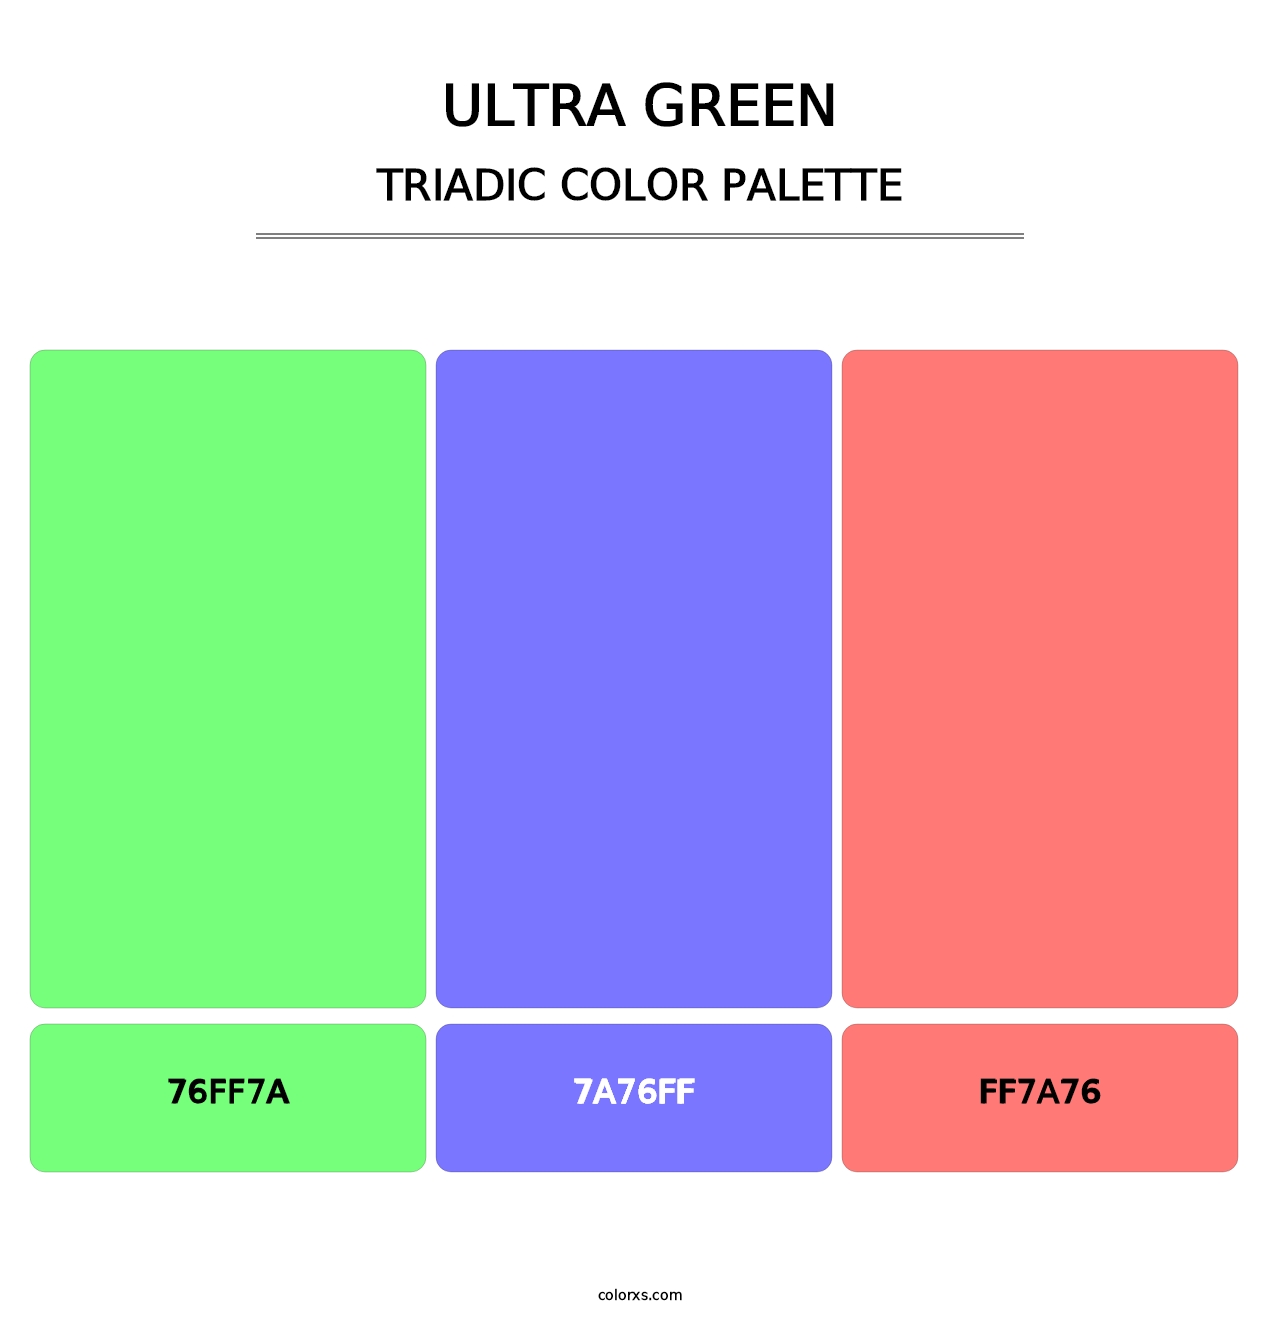 Ultra Green - Triadic Color Palette